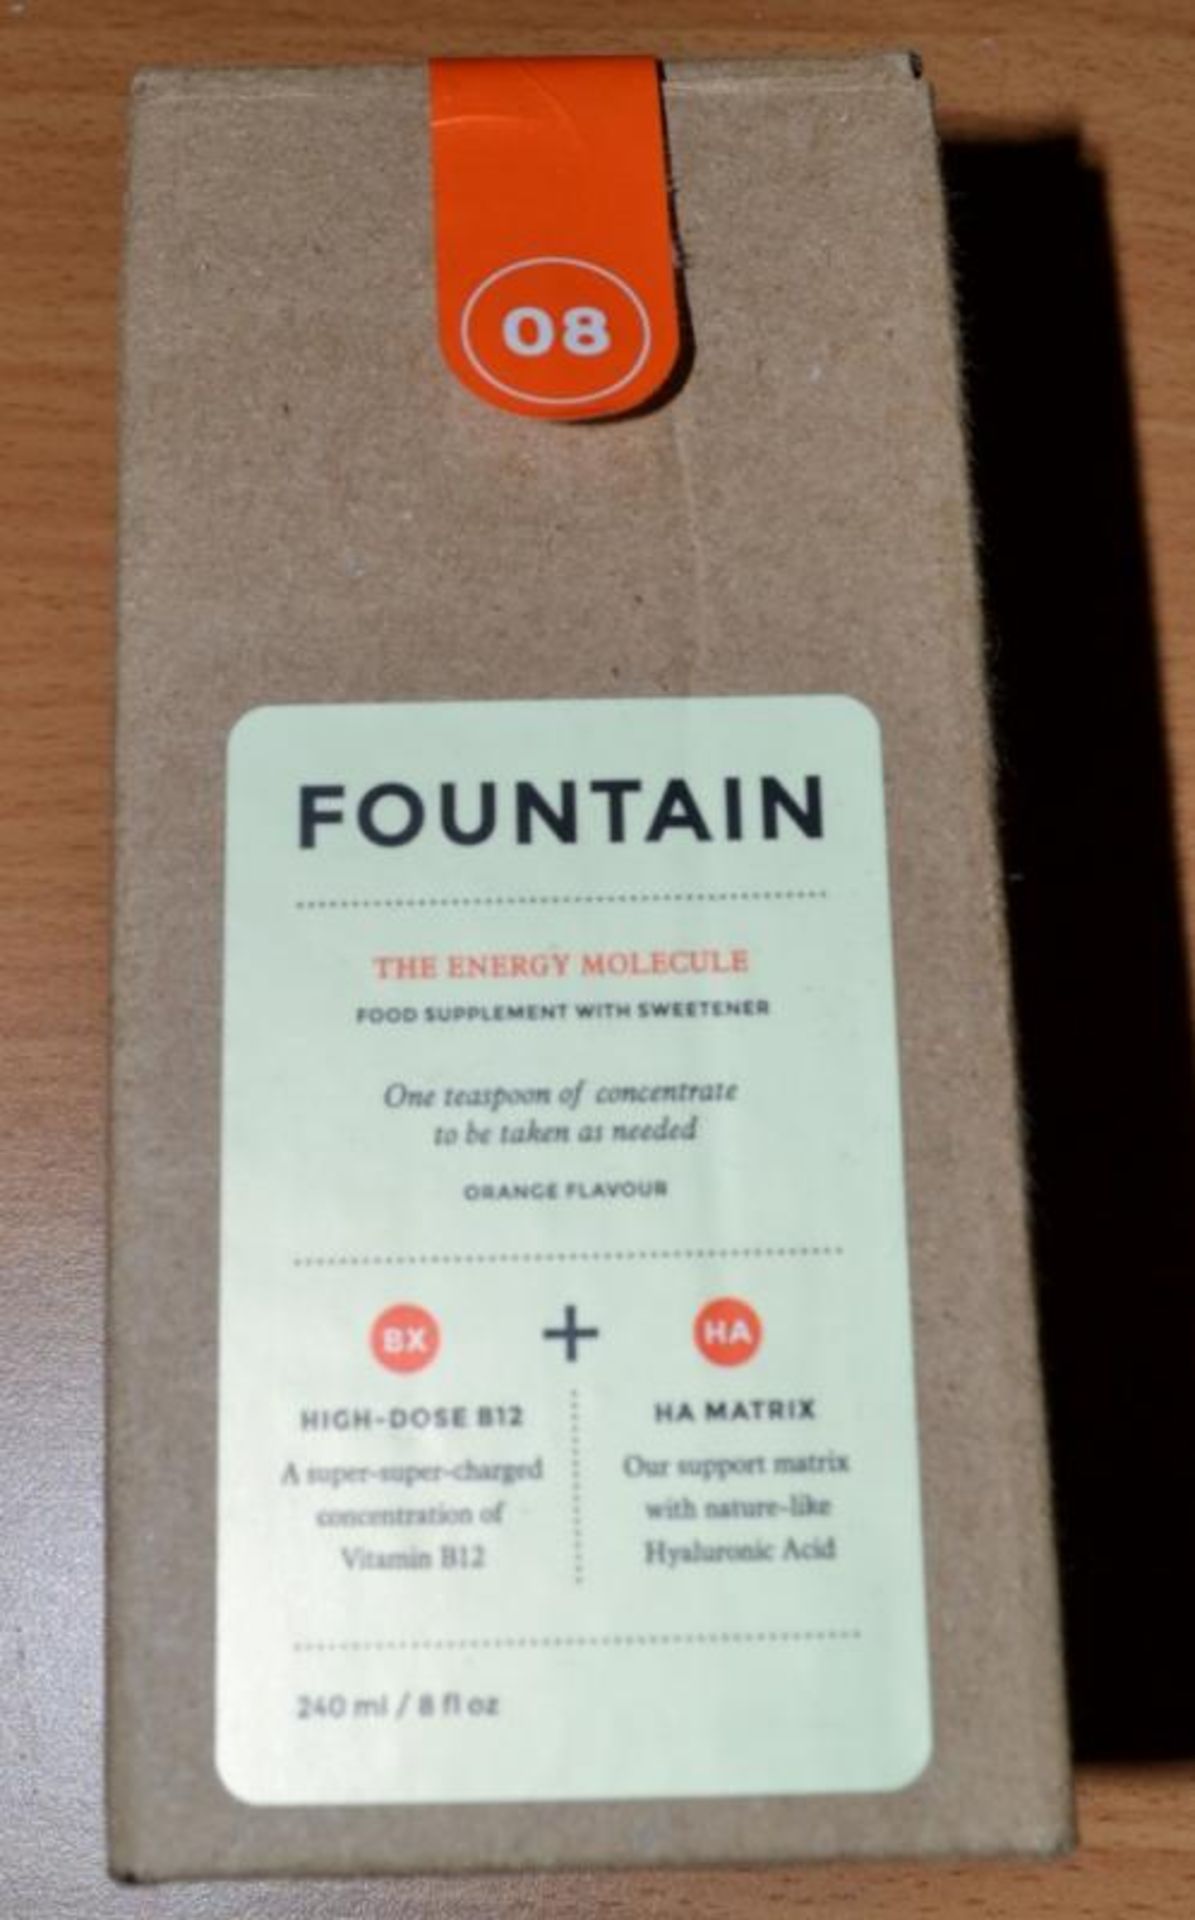 20 x 240ml Bottles of Fountain, The Energy Molecule Supplement - New & Boxed - CL185 - Ref: - Image 6 of 7